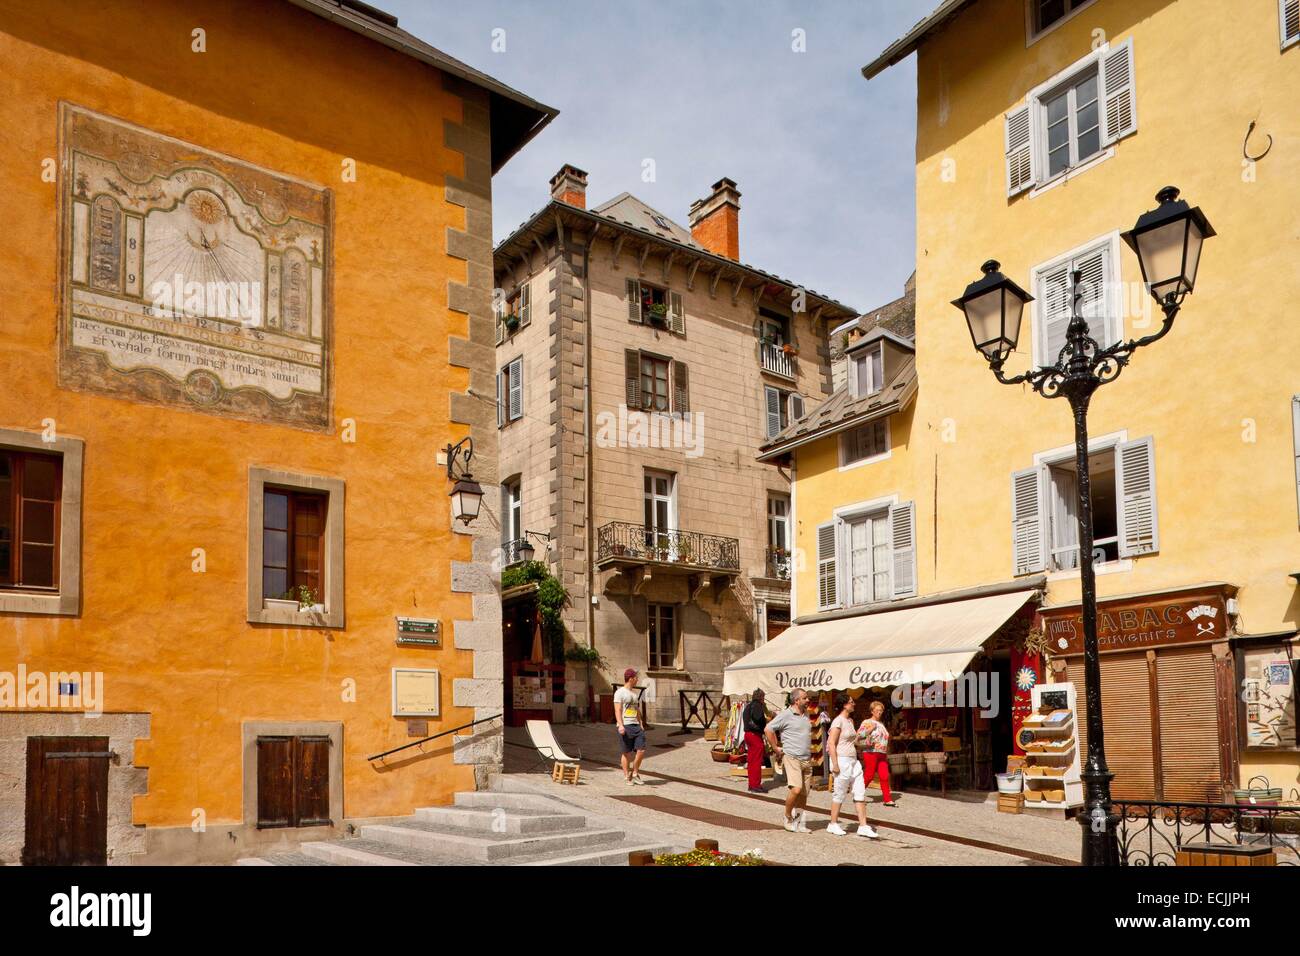 France, Hautes Alpes, Briancon, the parade, Vauban site listed as World Heritage by UNESCO Stock Photo